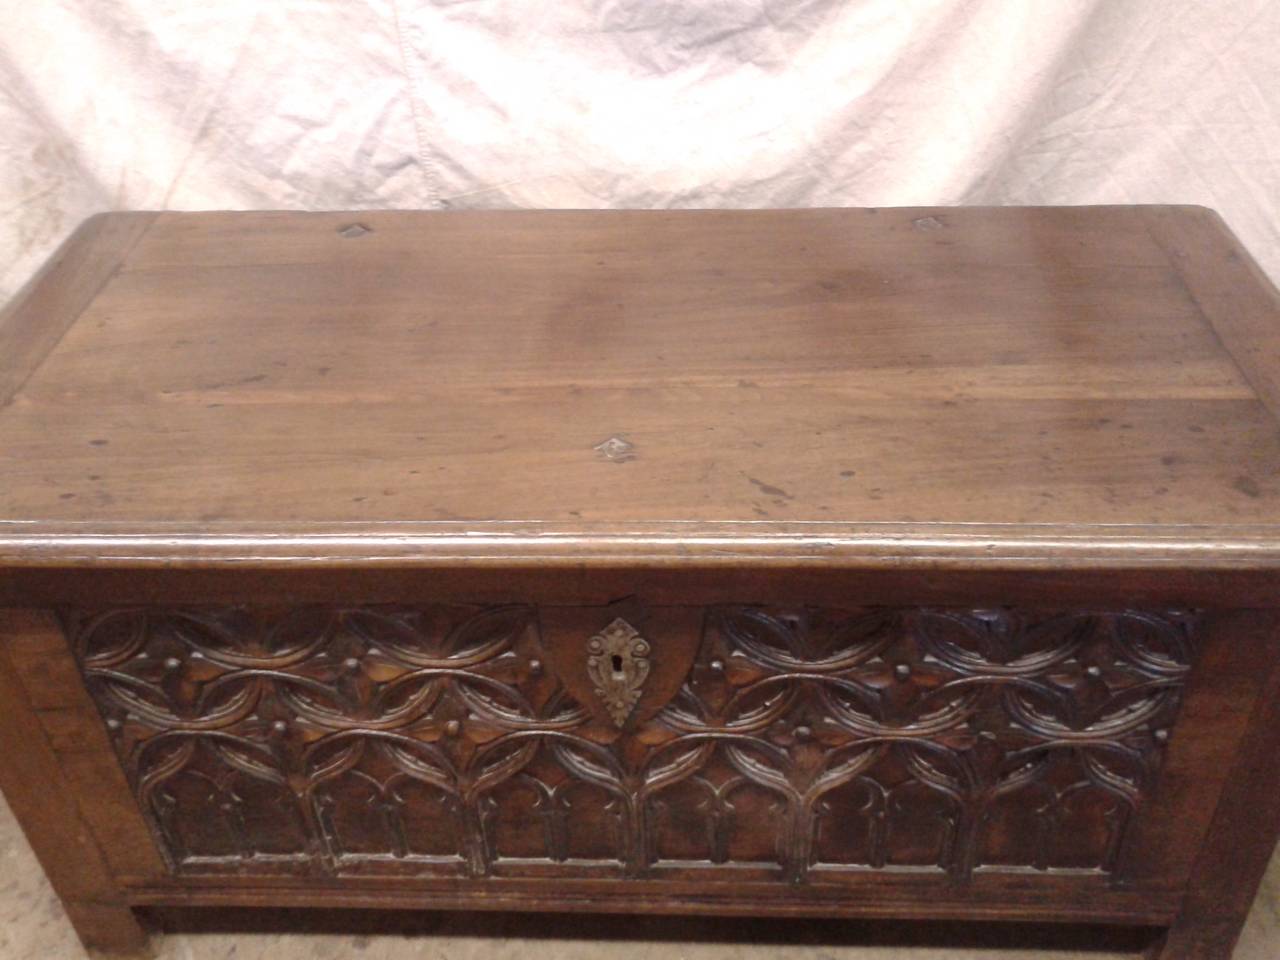 This is a beautiful 18th century, French, walnut trunk is delicately carved in the Gothic style. The trunk can be used as a storage furniture or a coffee table.